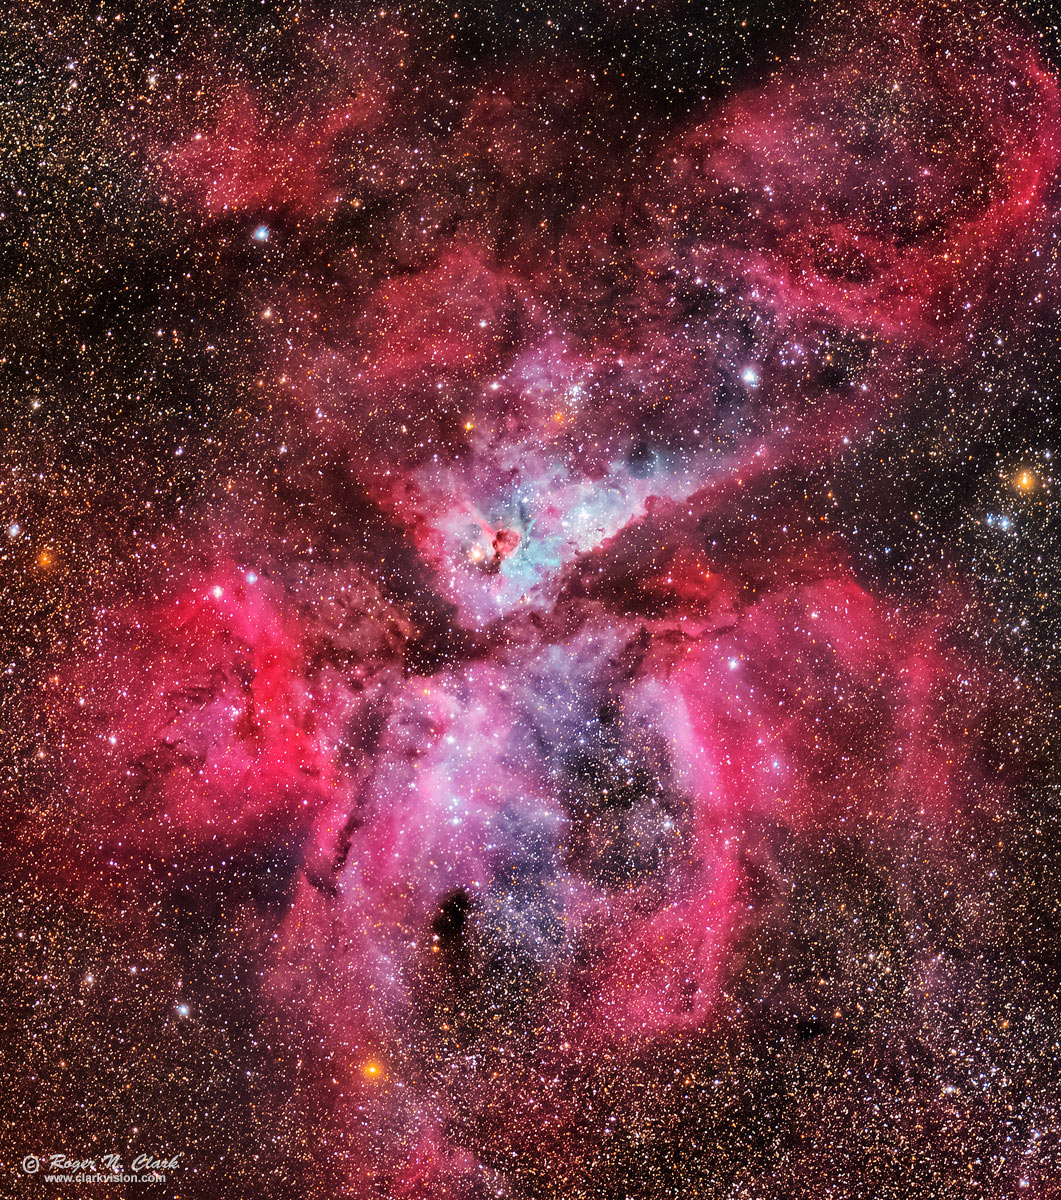 image eta-carina.300mm.rnclark.c03.17.2018.0J6A1152-1240av86.h-c1r-1200v.jpg is Copyrighted by Roger N. Clark, www.clarkvision.com